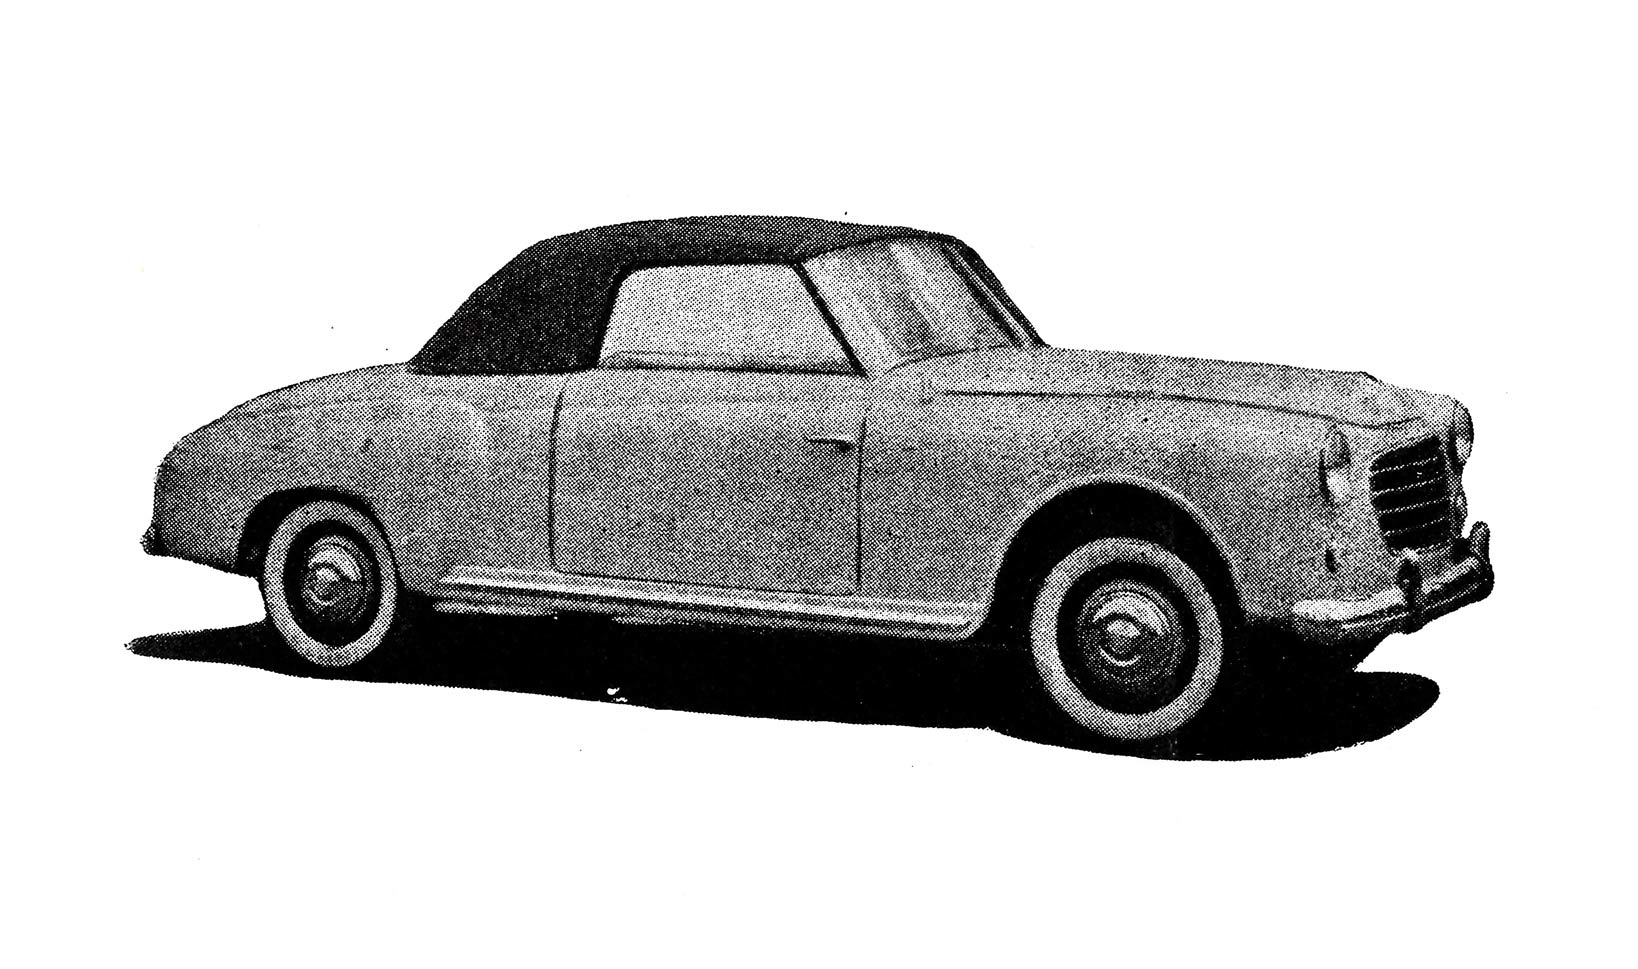 Pic-340.-1951-Fiat-1400-Rondine-convertible-bodied-by-Monviso-with-its-top-closed.